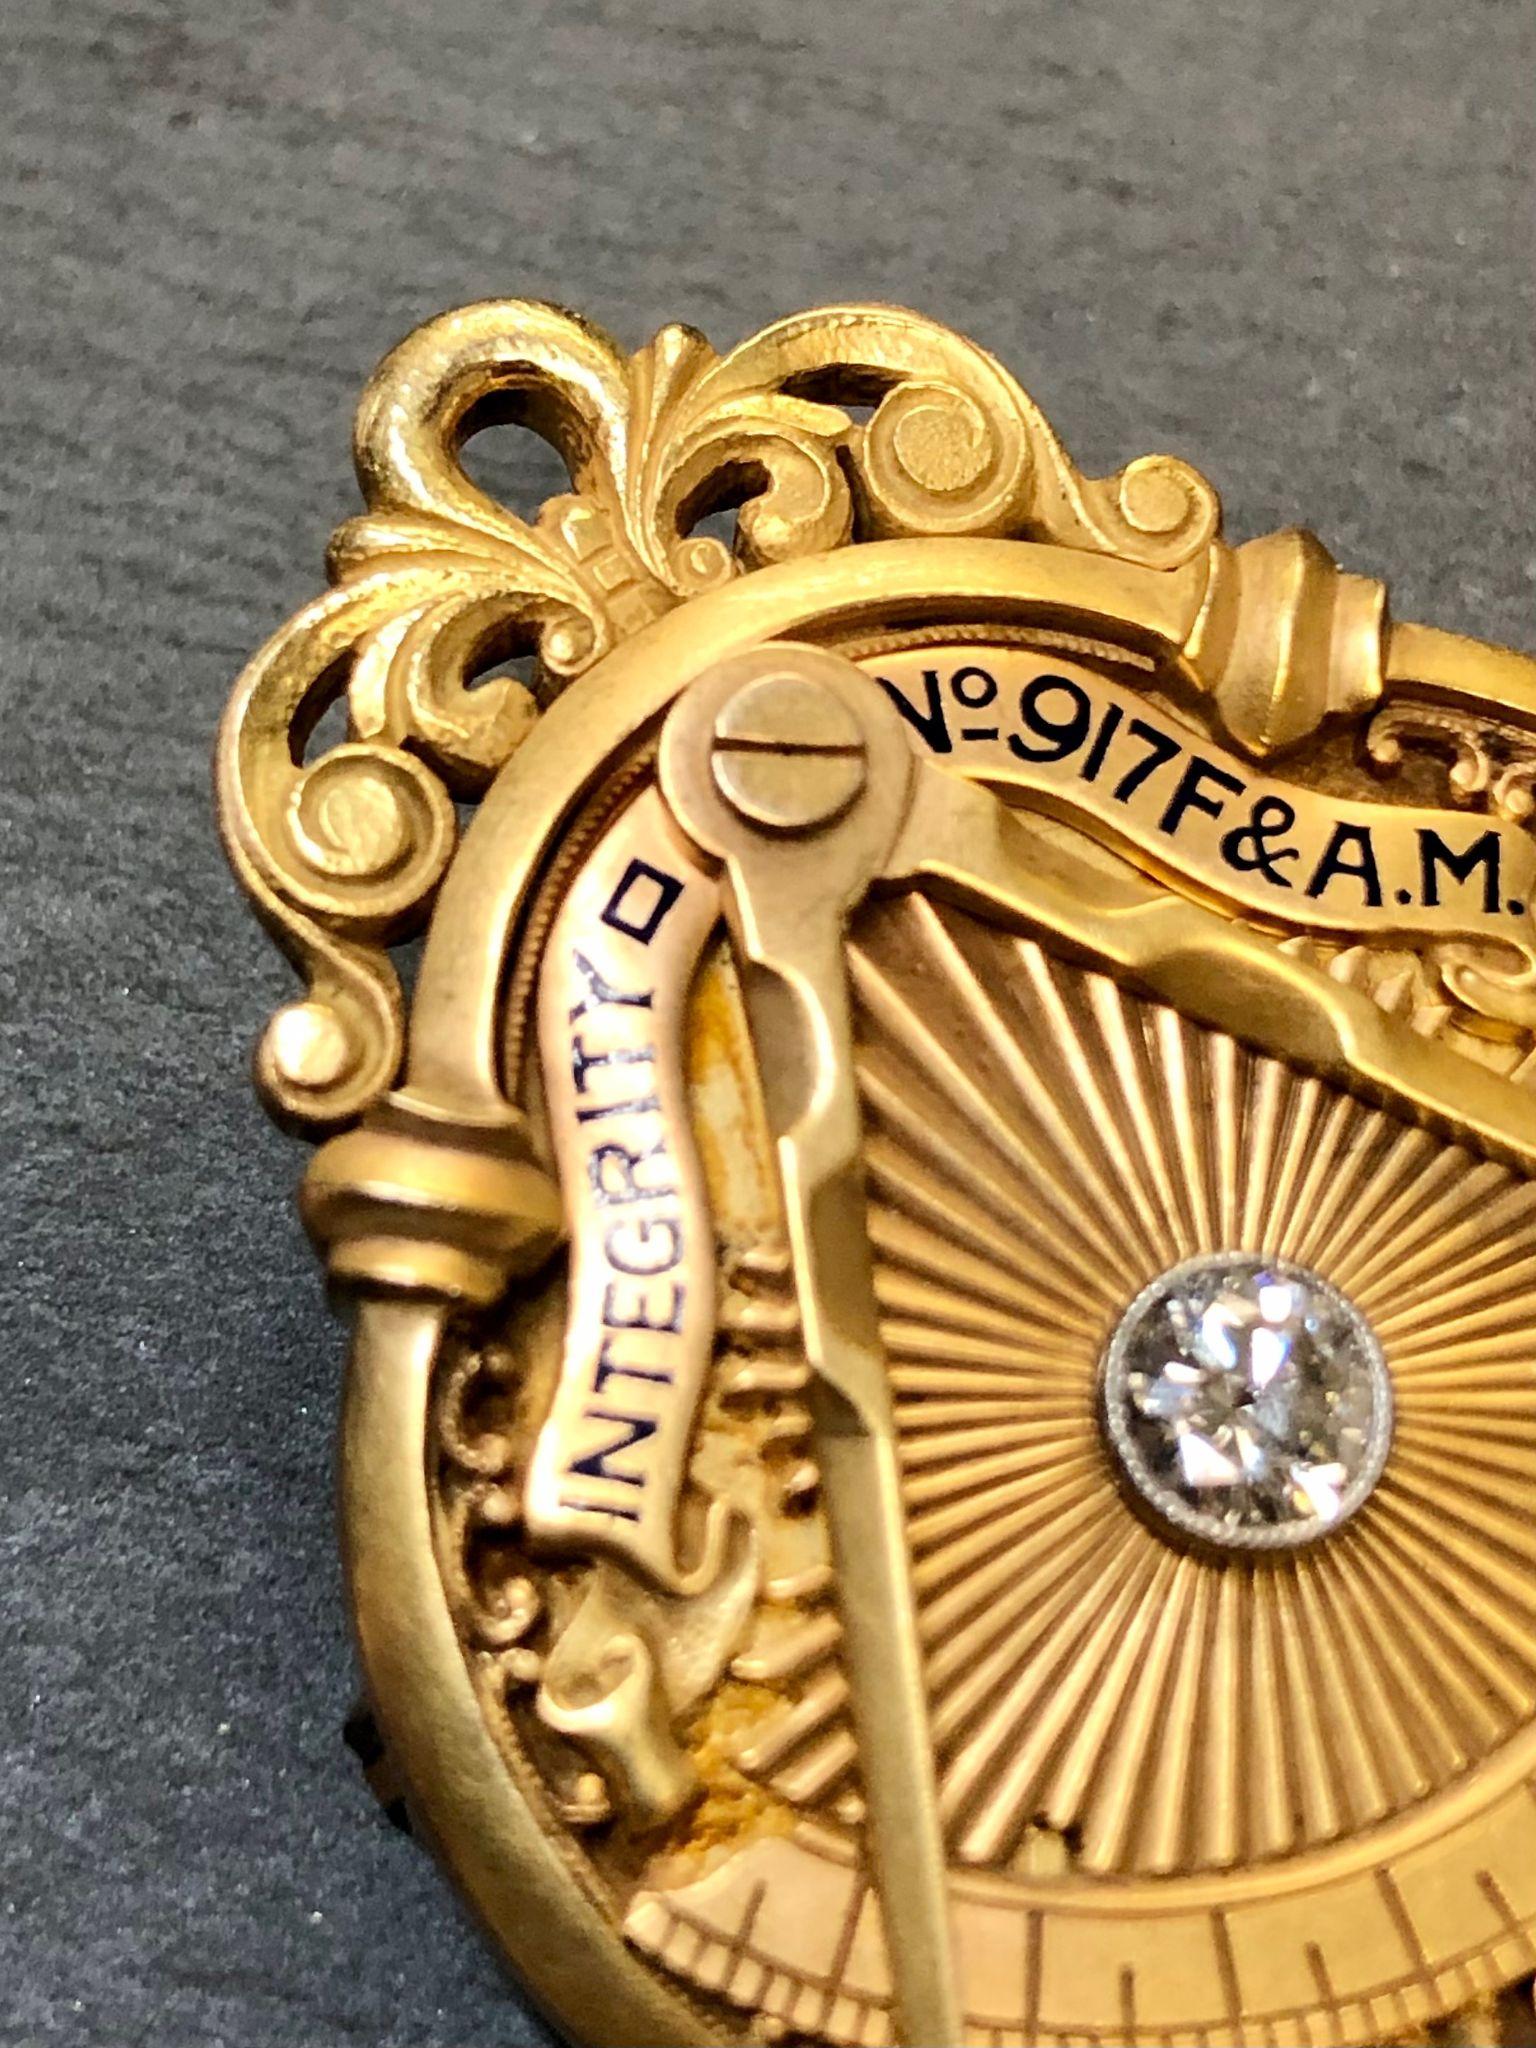 An absolutely incredible pin. The detailing is unlike anything we have ever seen in jewelry let alone Masonic jewelry. It is done in 18K gold and enamel and centered by an approximately .25ct H-I color Vs1 clarity old European cut Diamond. The